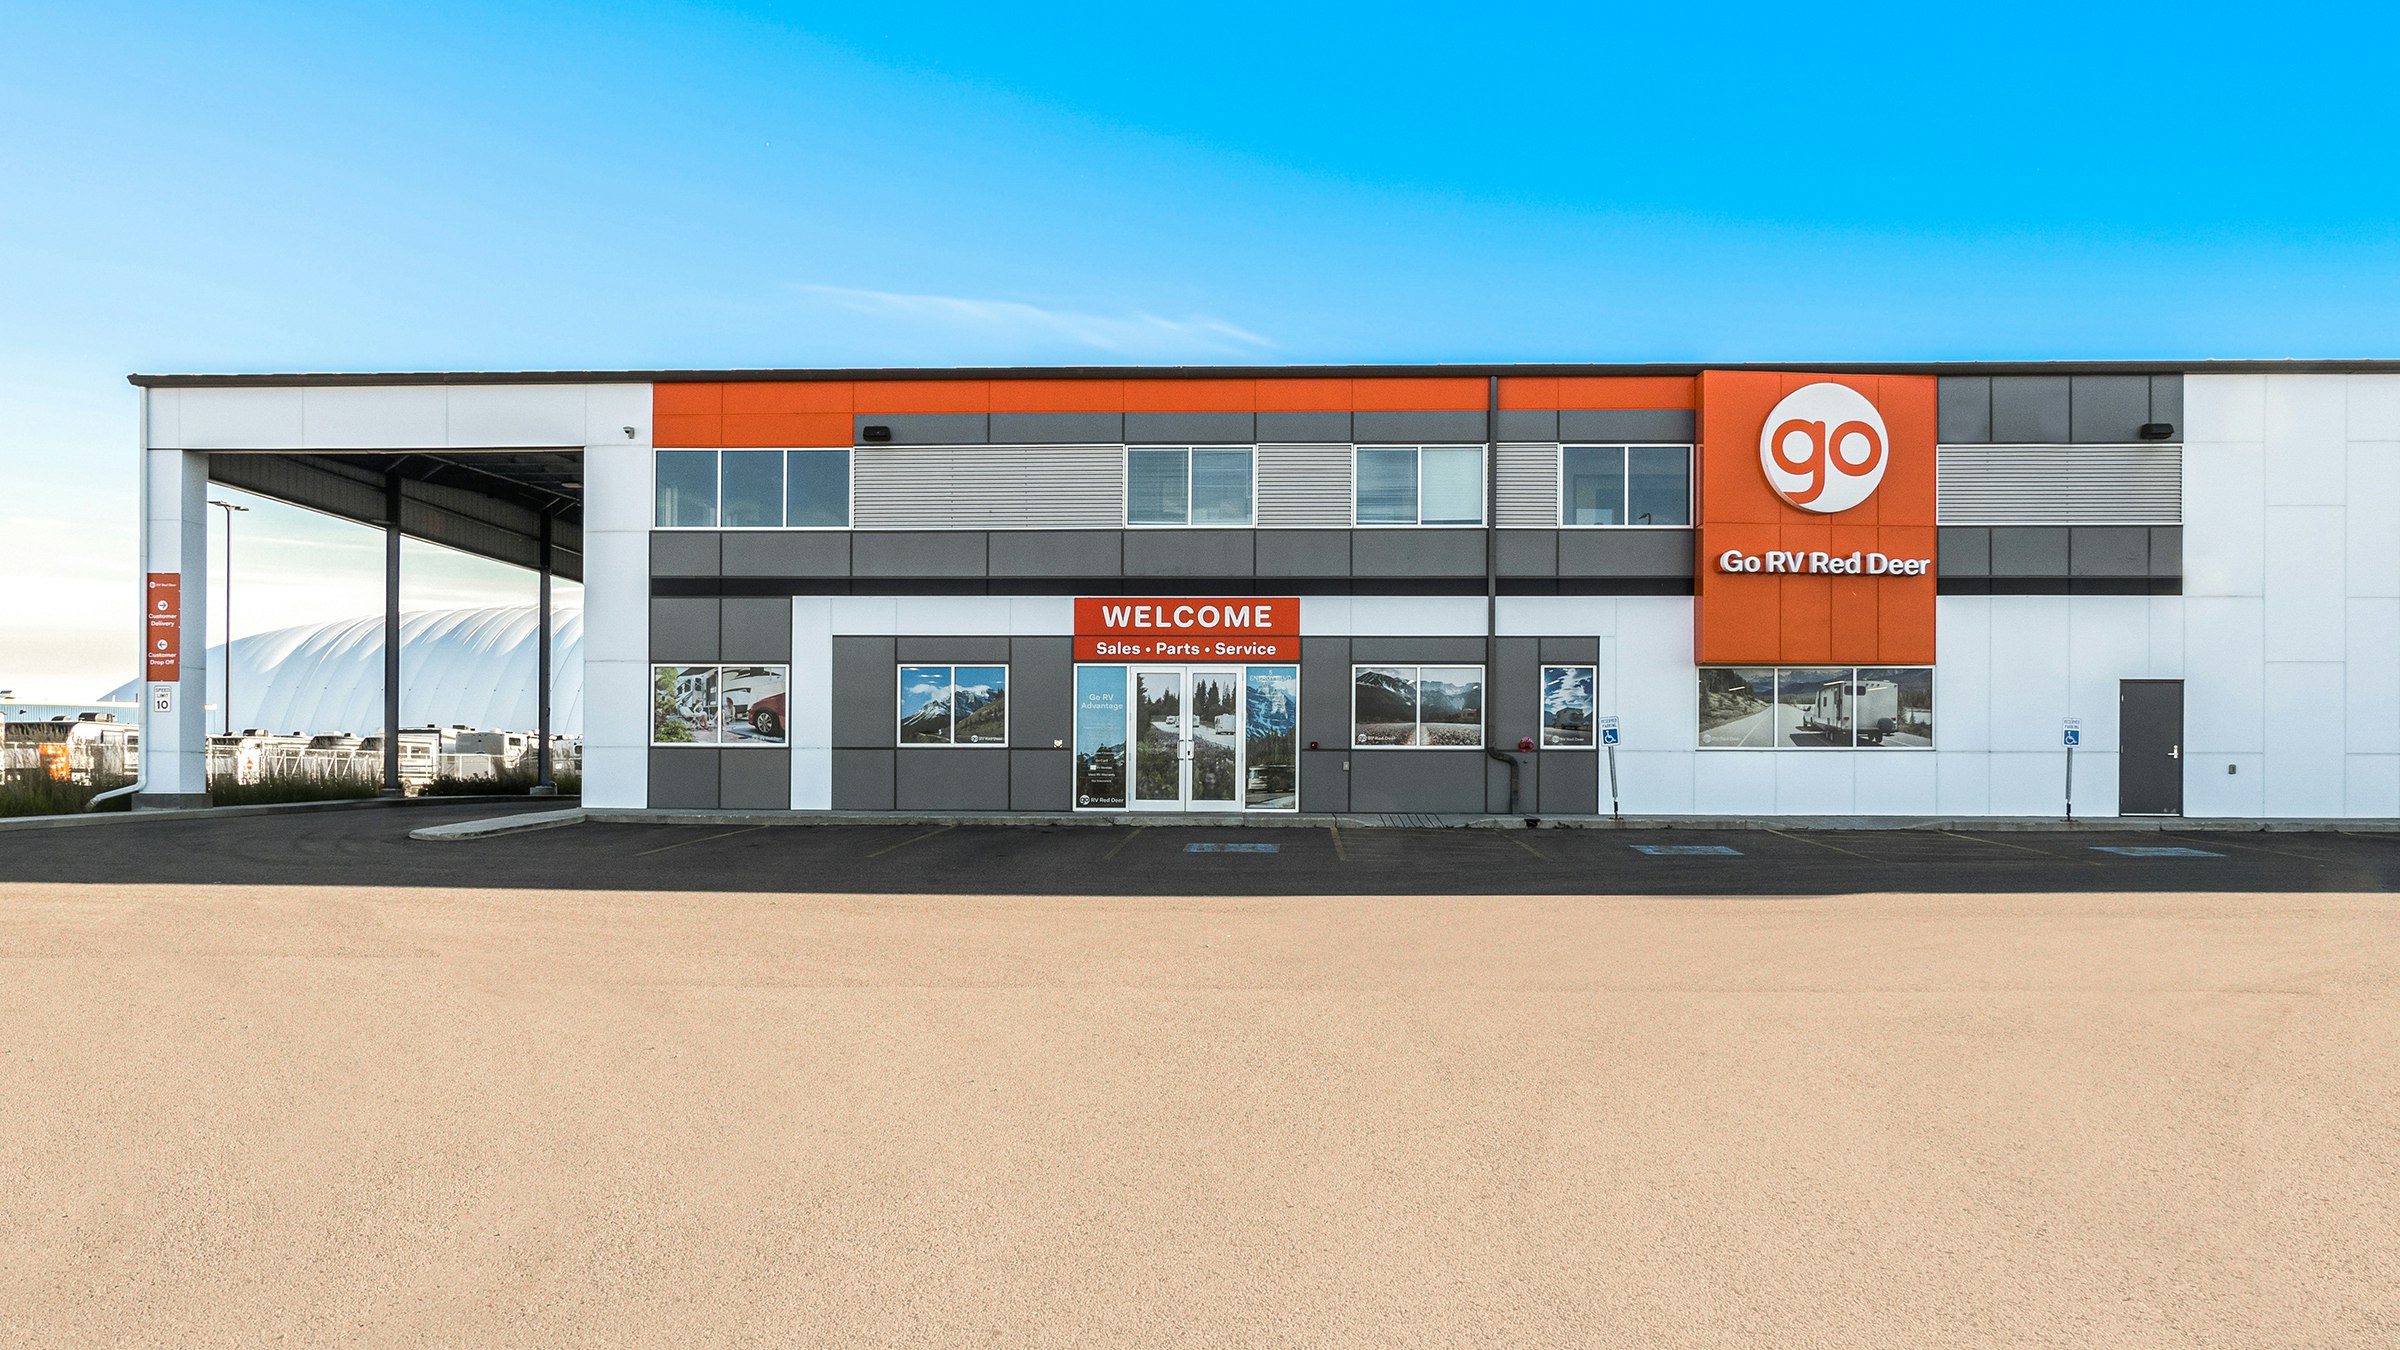 Photo of the outside of the Go RV Red Deer dealership